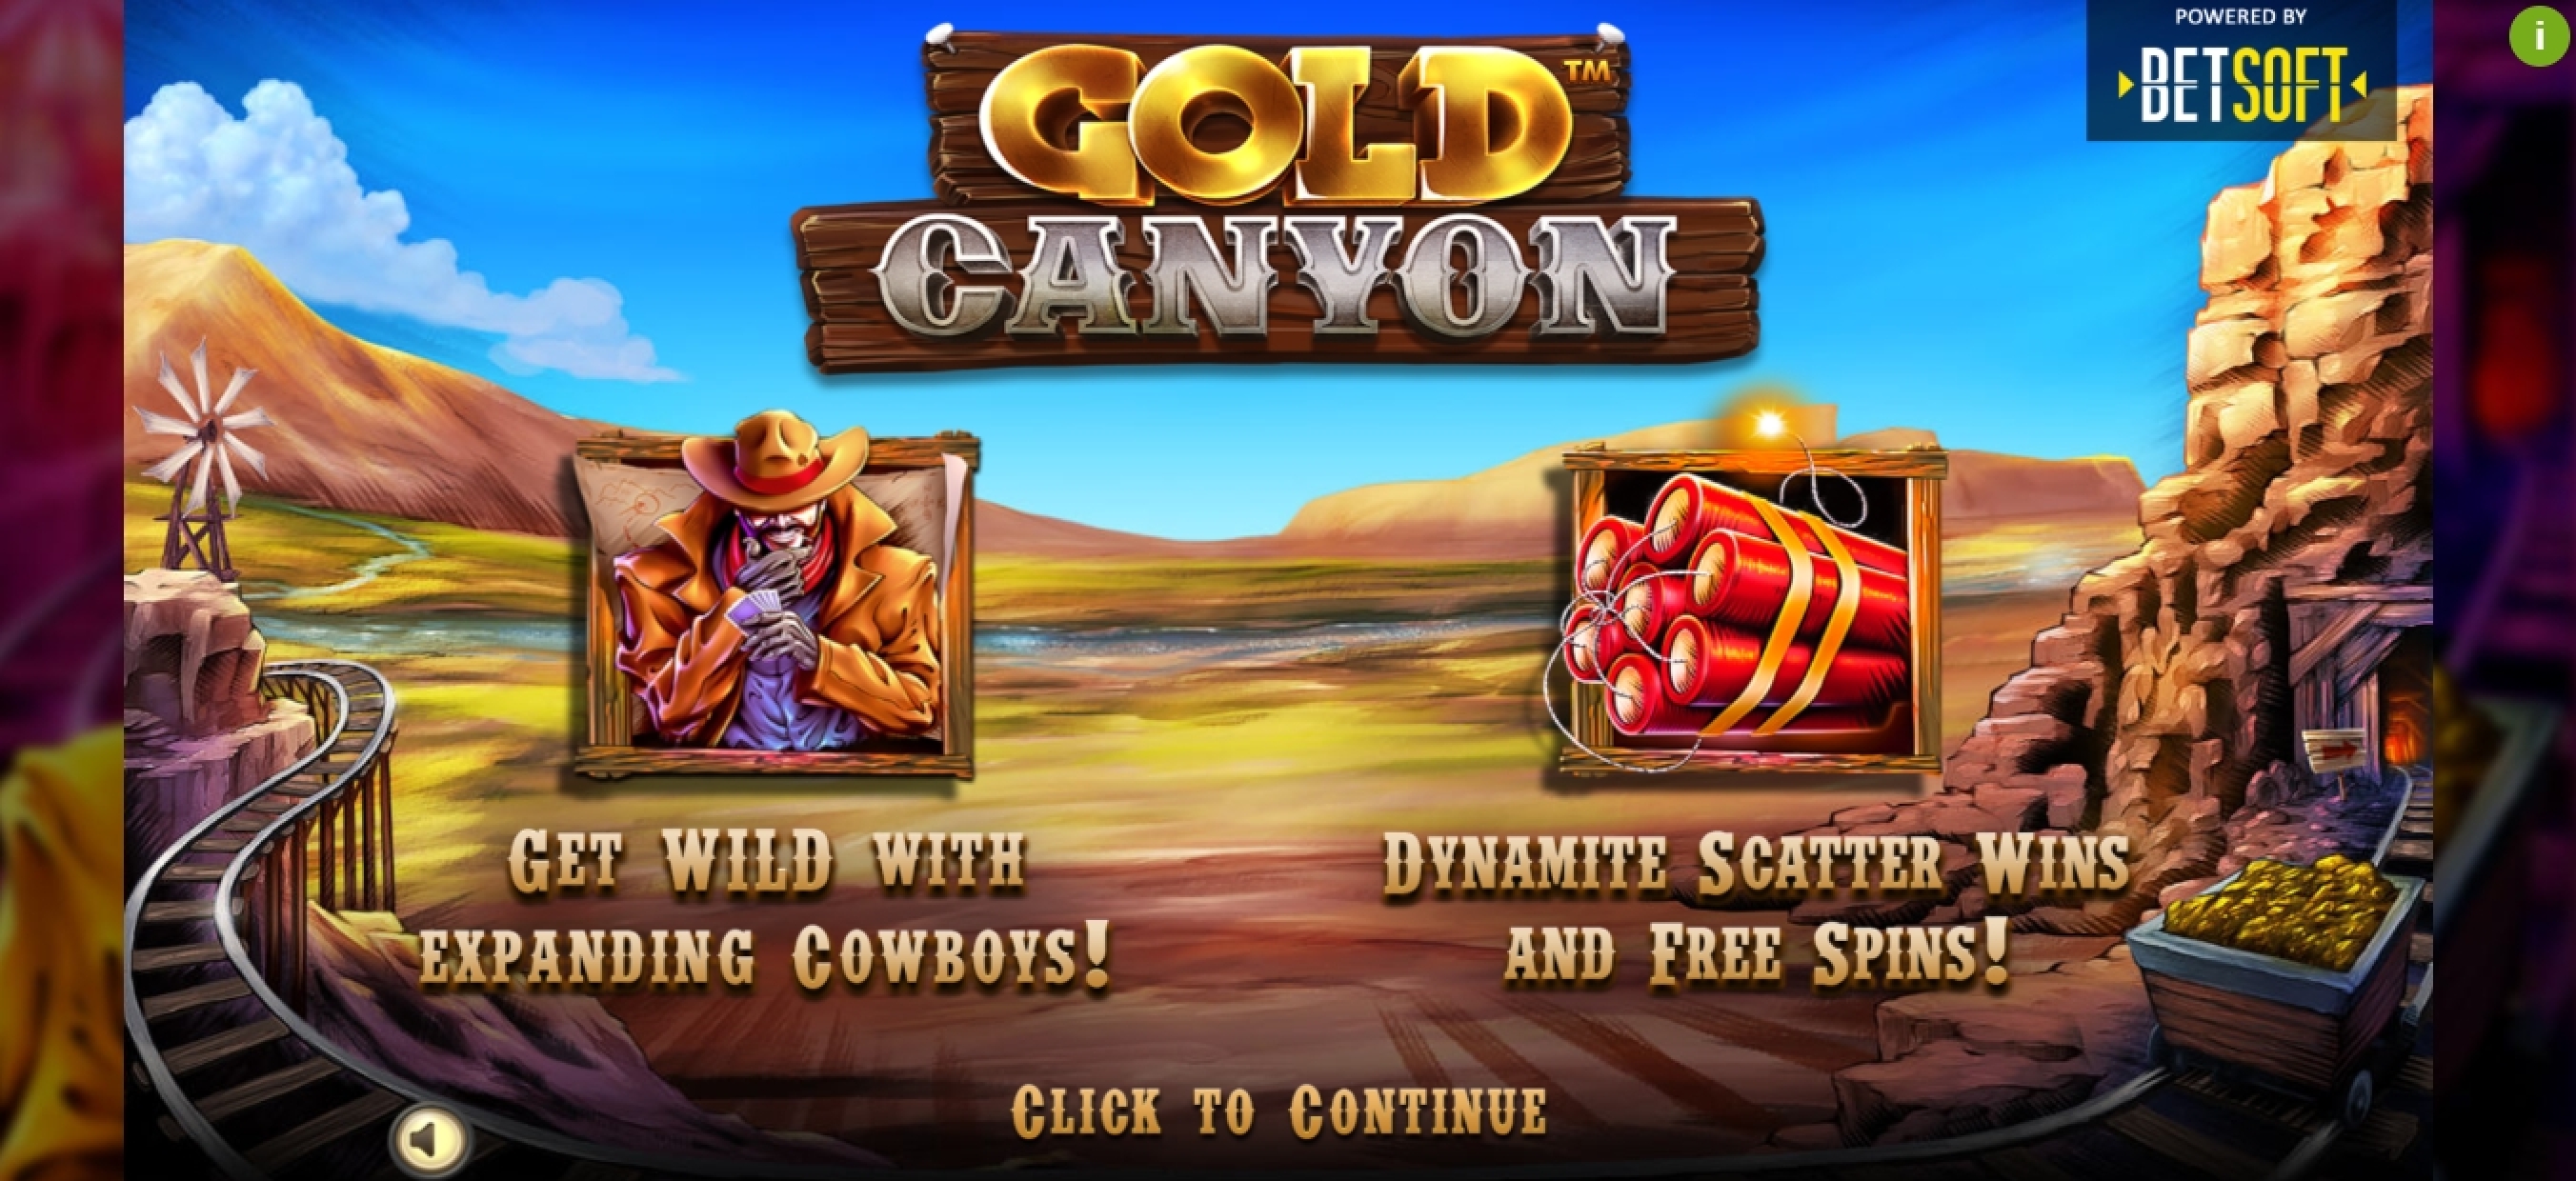 Play Gold Canyon Free Casino Slot Game by Betsoft